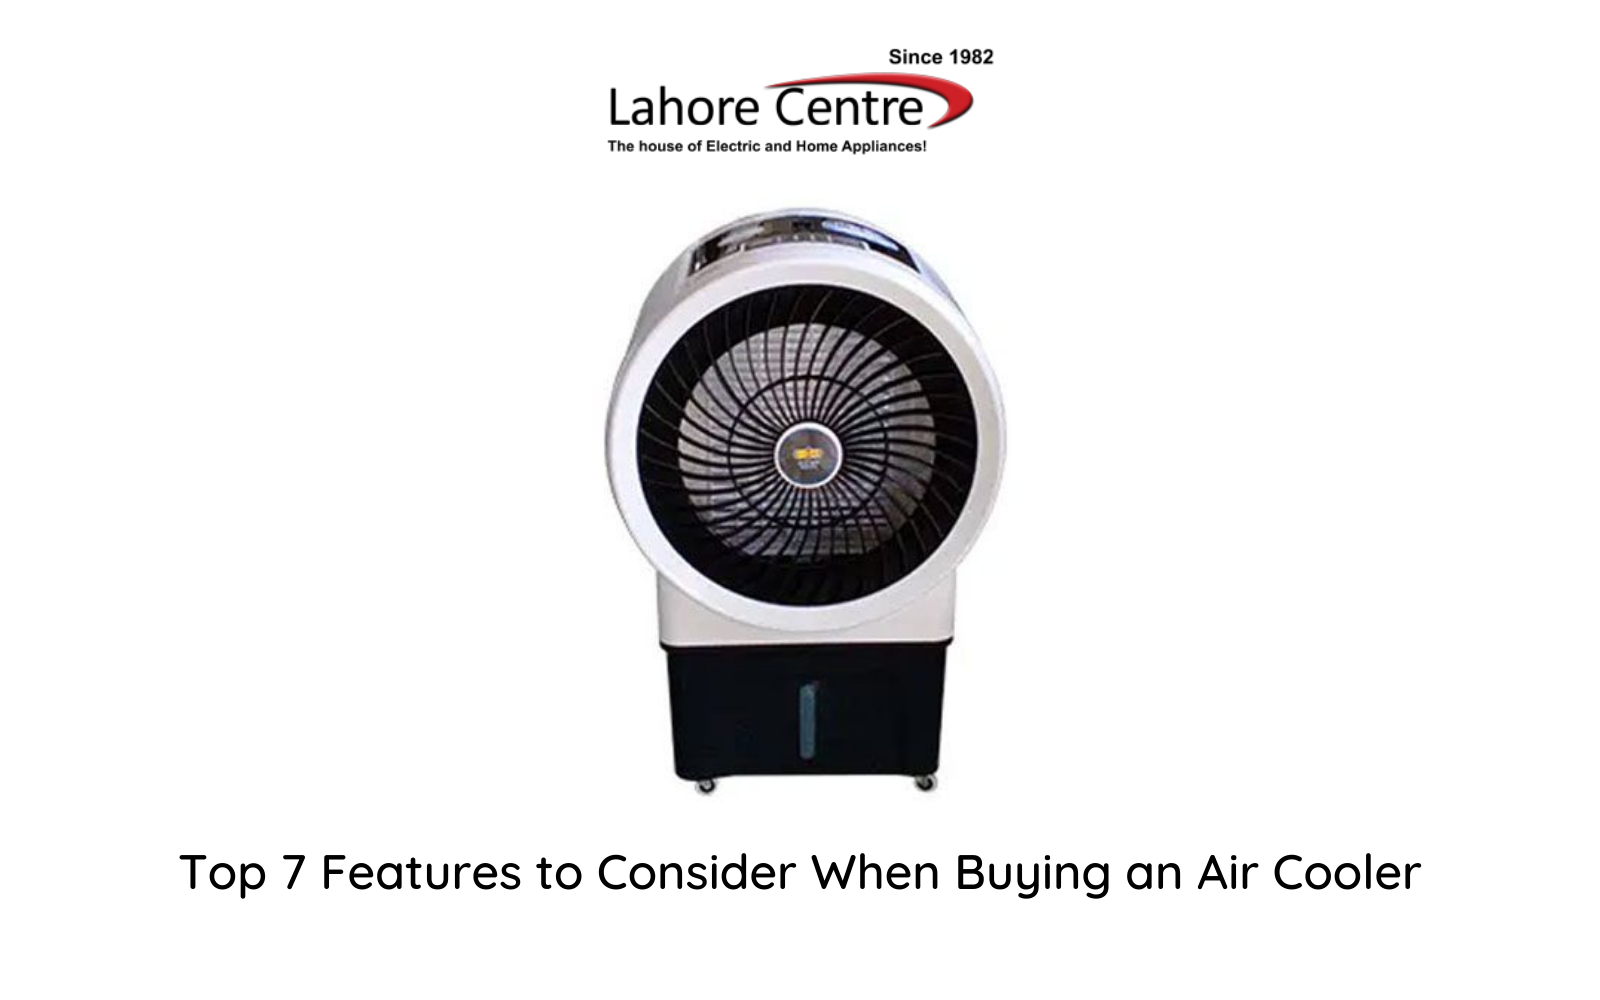 Top 7 Features to Consider When Buying an Air Coolers